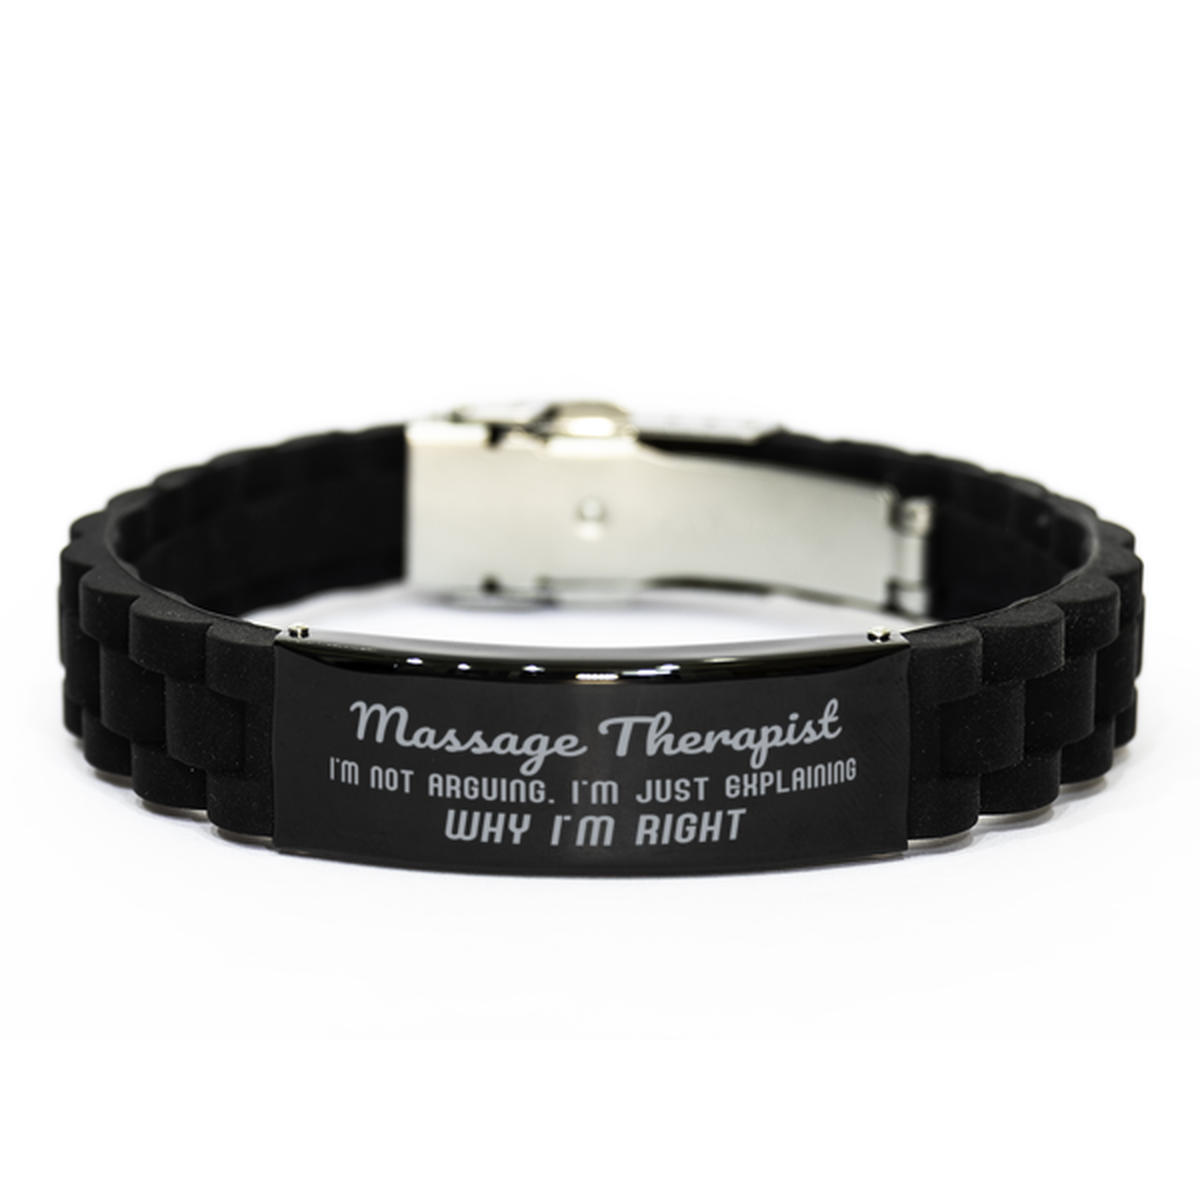 Massage Therapist I'm not Arguing. I'm Just Explaining Why I'm RIGHT Black Glidelock Clasp Bracelet, Funny Saying Quote Massage Therapist Gifts For Massage Therapist Graduation Birthday Christmas Gifts for Men Women Coworker